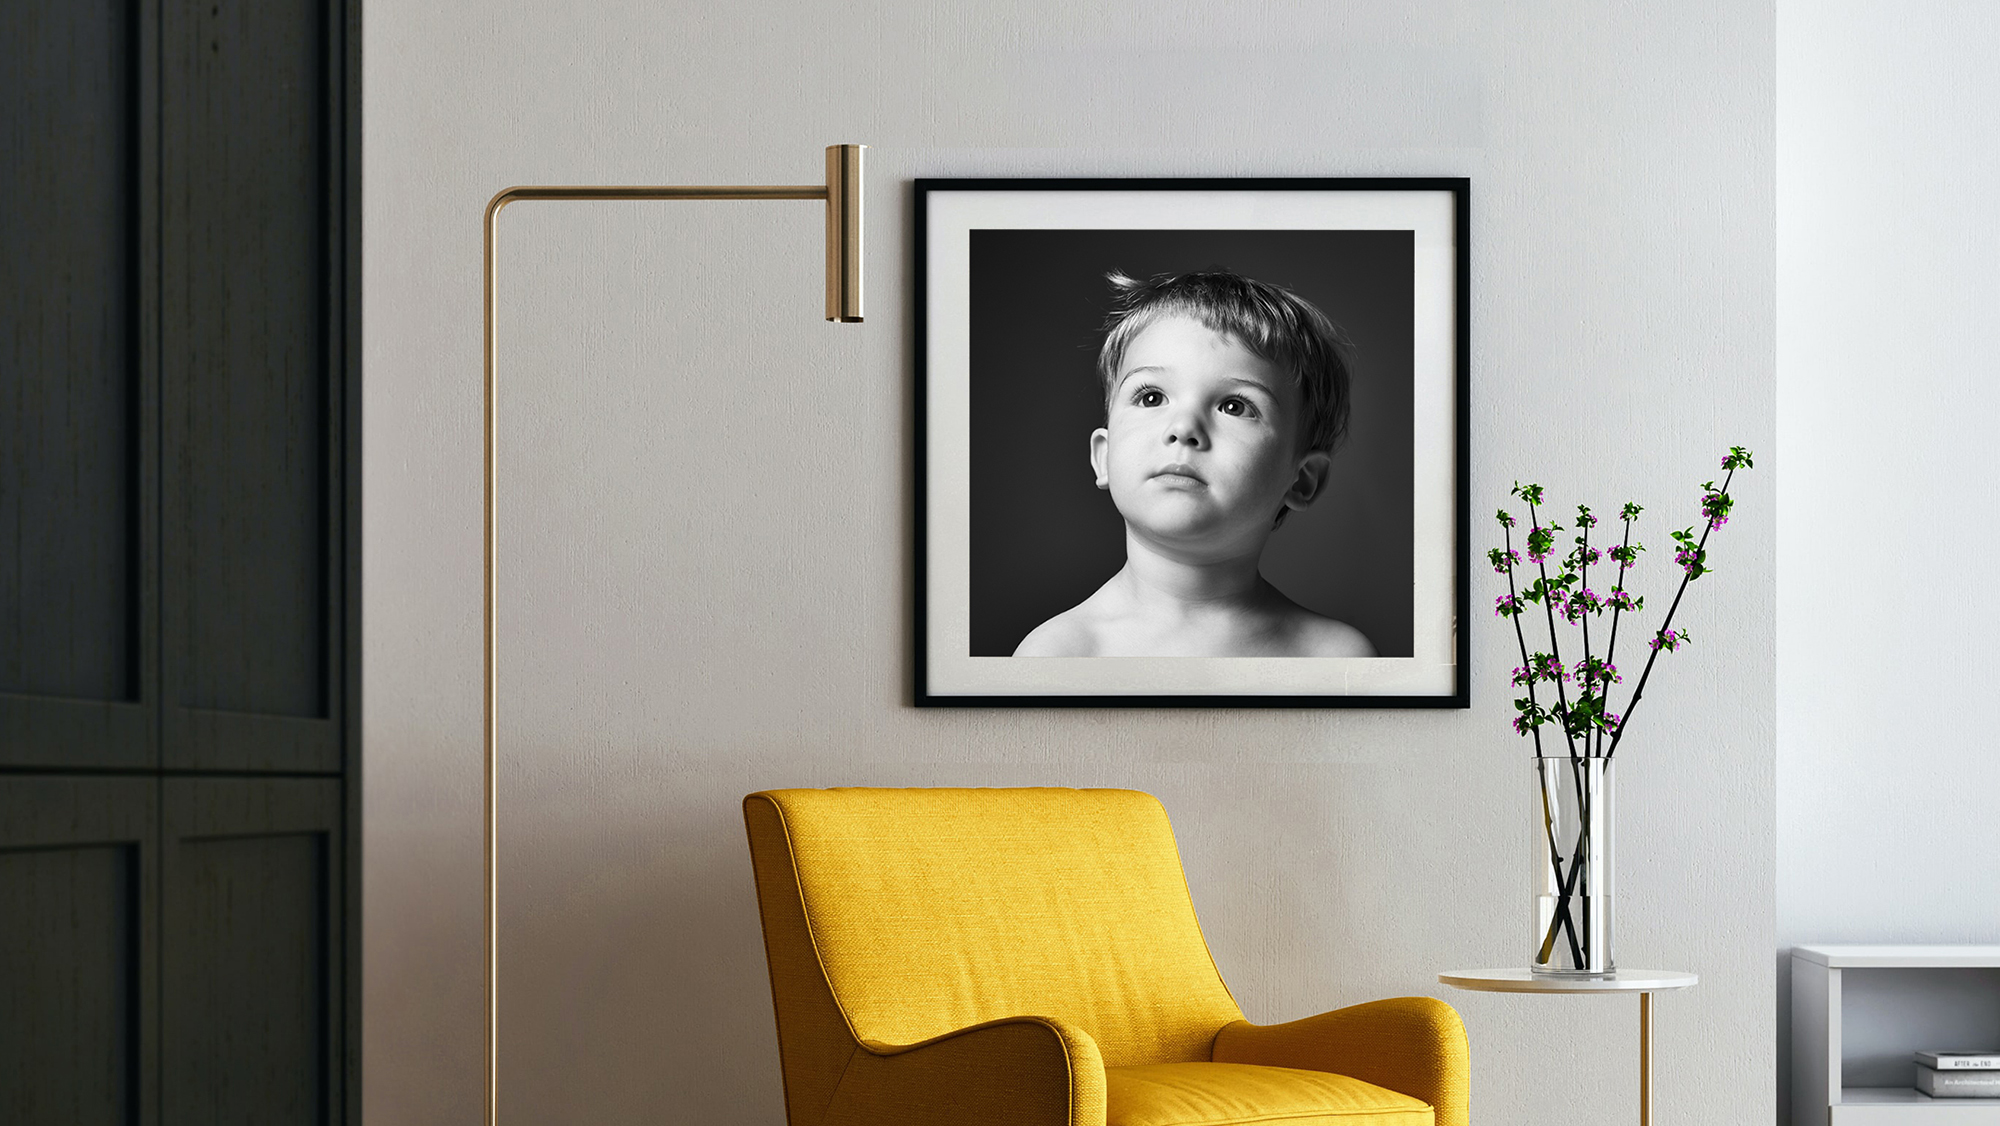 Black and White photograph of a little boy in a black frame hanging on a wall